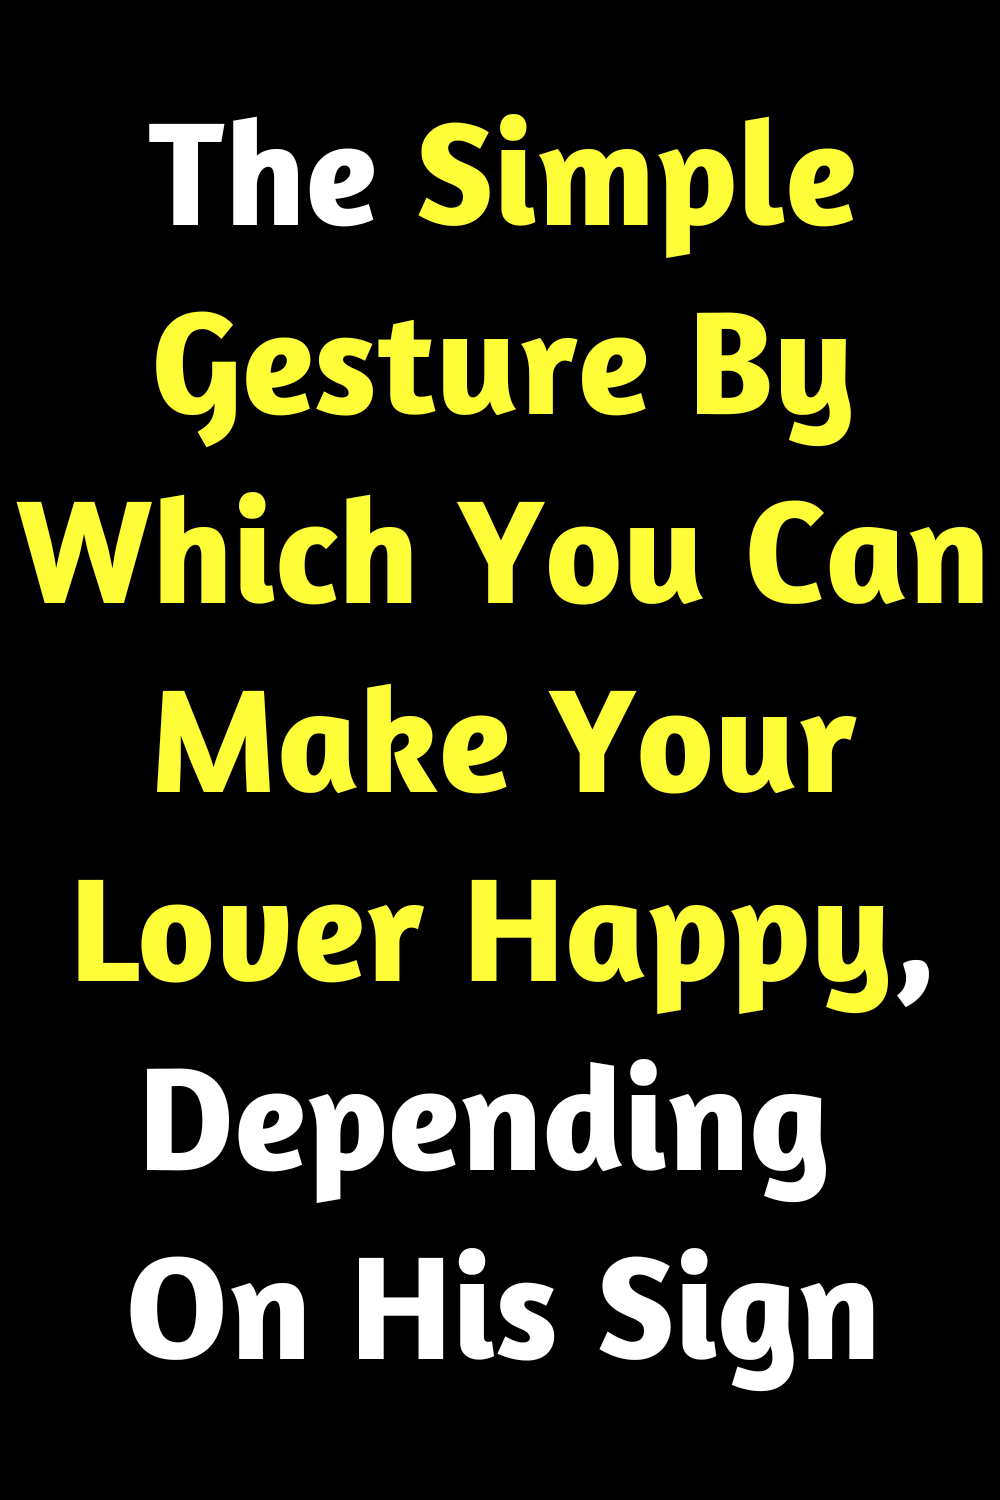 The Simple Gesture By Which You Can Make Your Lover Happy, Depending On His Sign